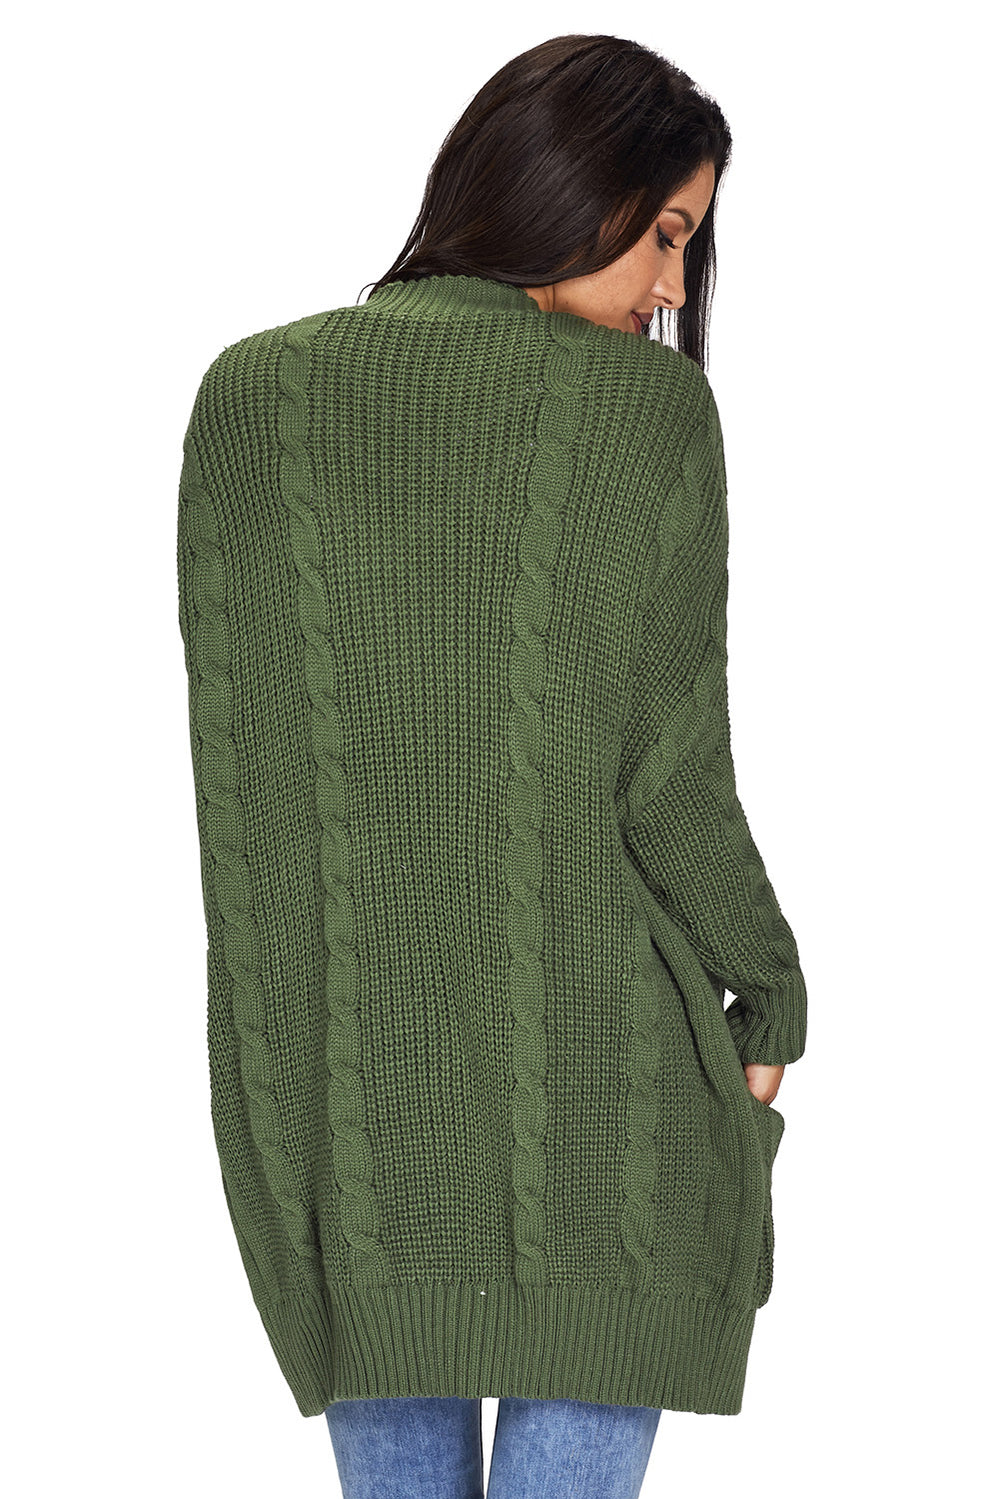 Army Green Knit Texture Long Sleeve Cardigan with pockets